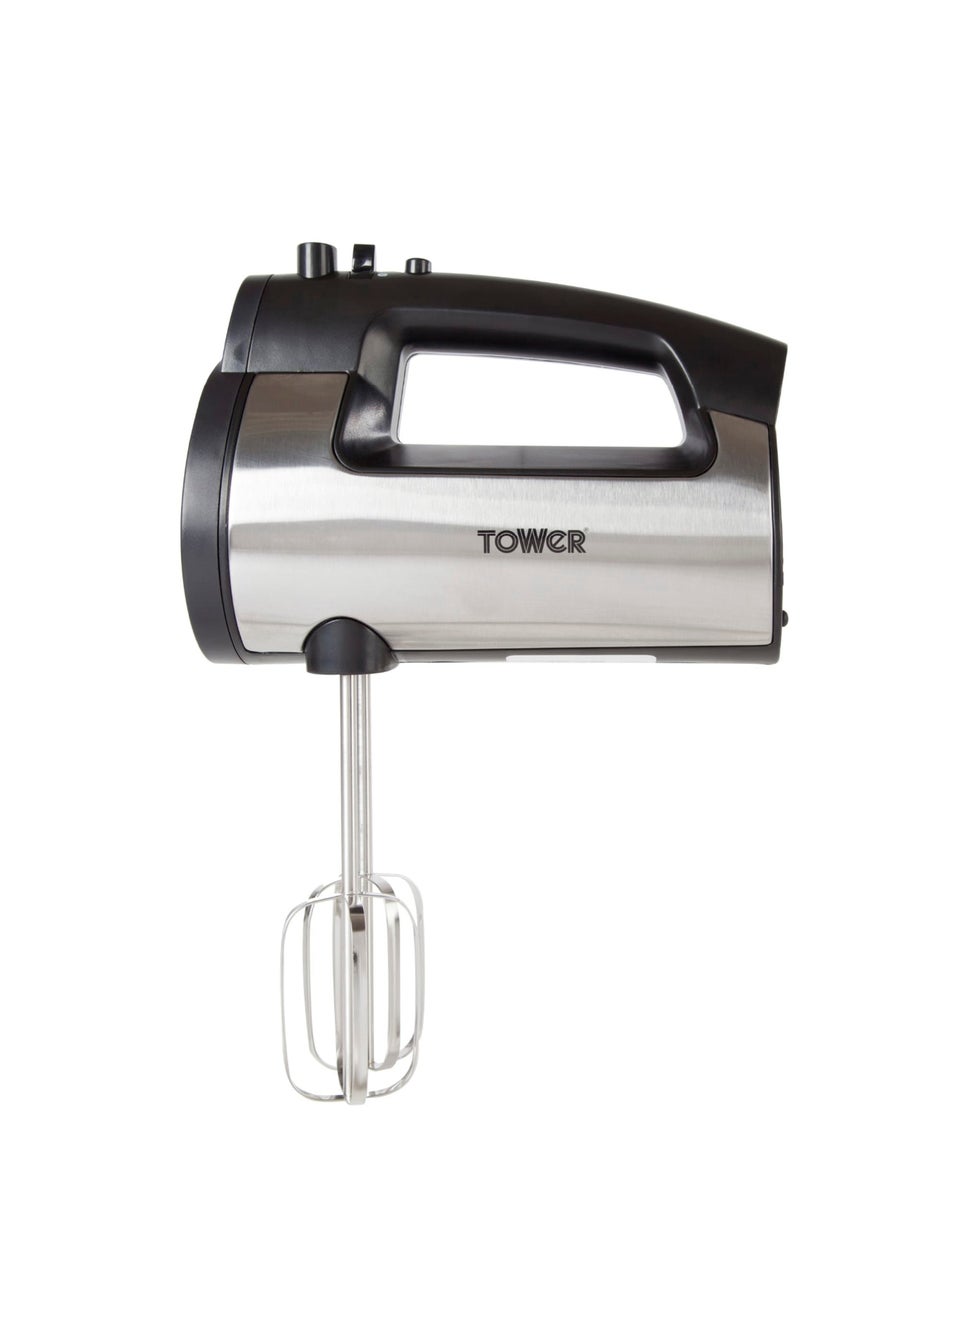 Tower 300W Stainless Steel Hand Mixer